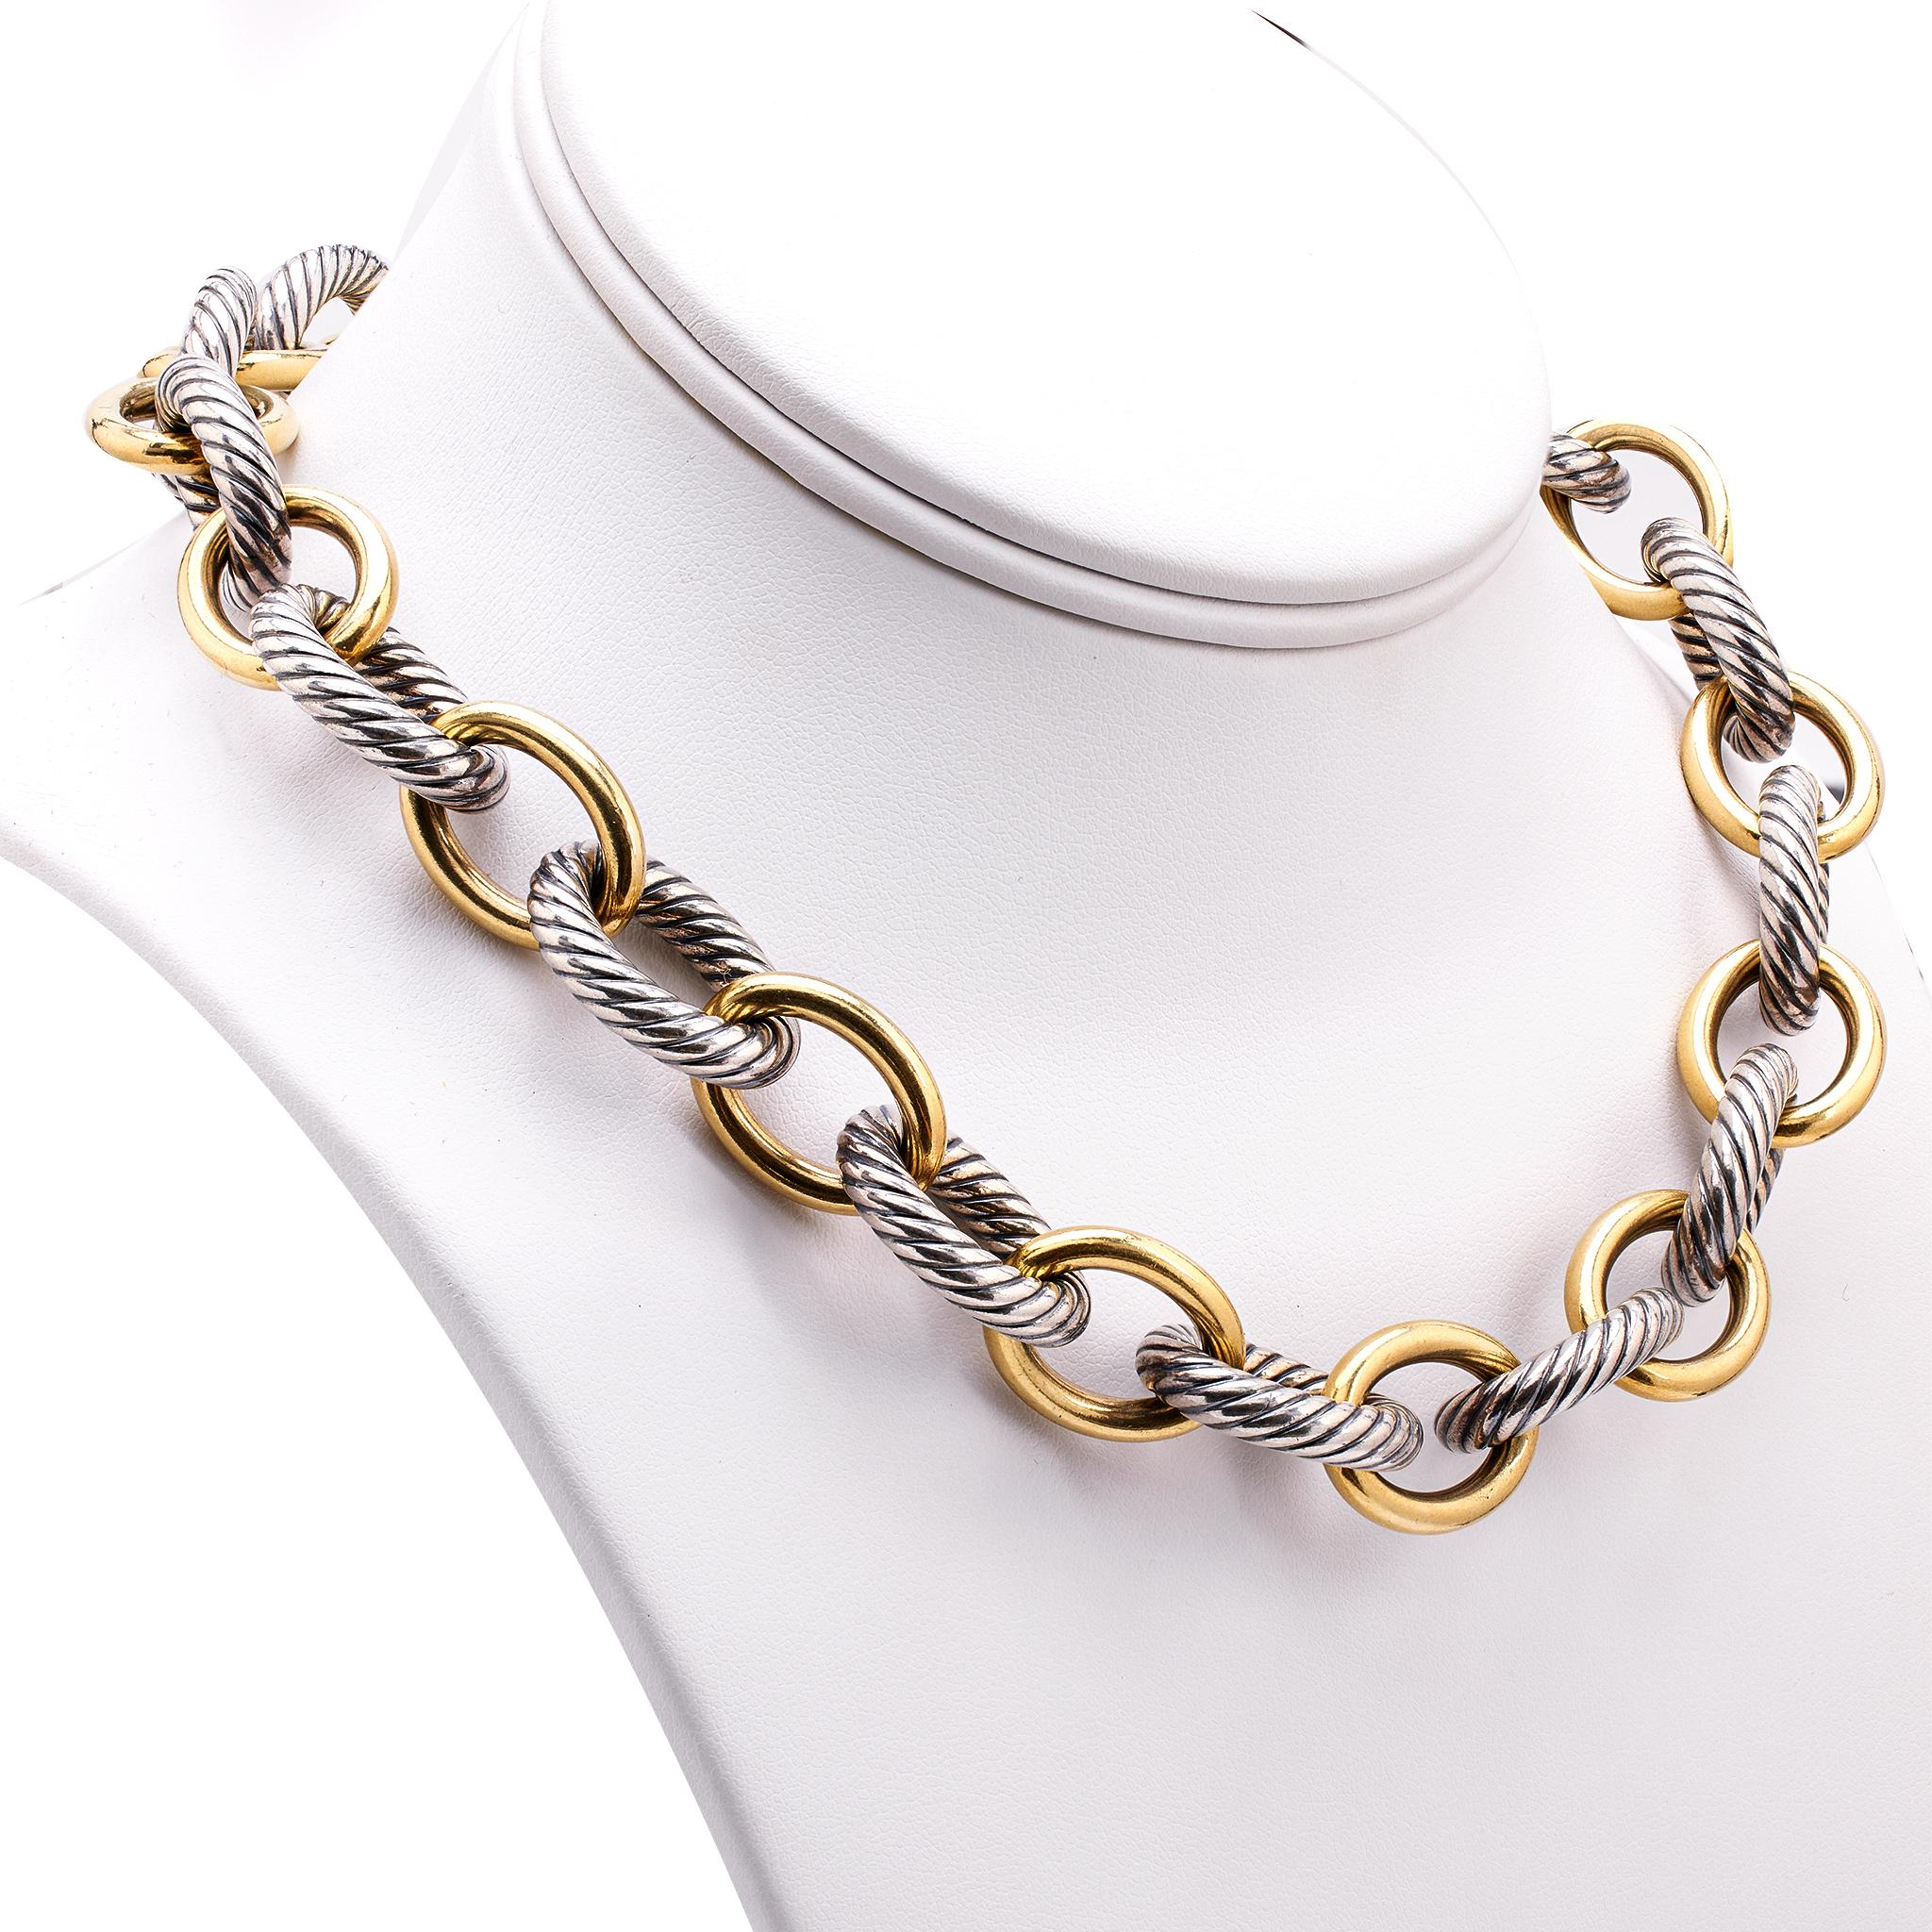 David Yurman 18k Yellow Gold Sterling Silver Oval Link Chain Necklace In Excellent Condition For Sale In Beverly Hills, CA